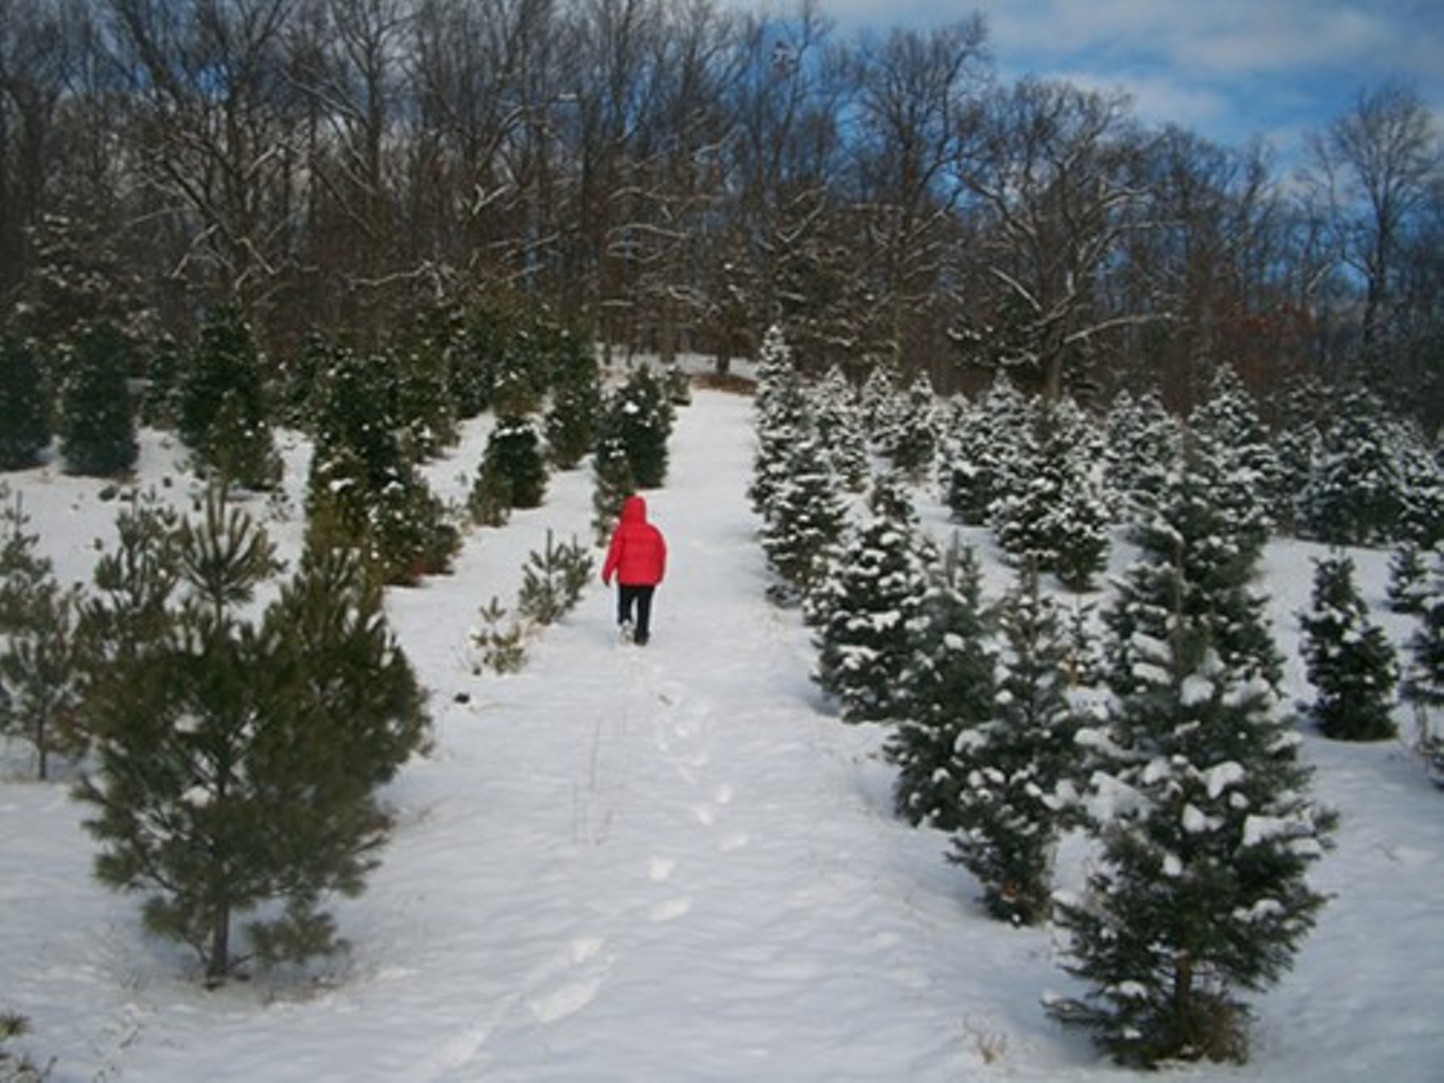 Battenfeld's Christmas Tree Farm: Cut Your Own Tree | Daily Dose ...